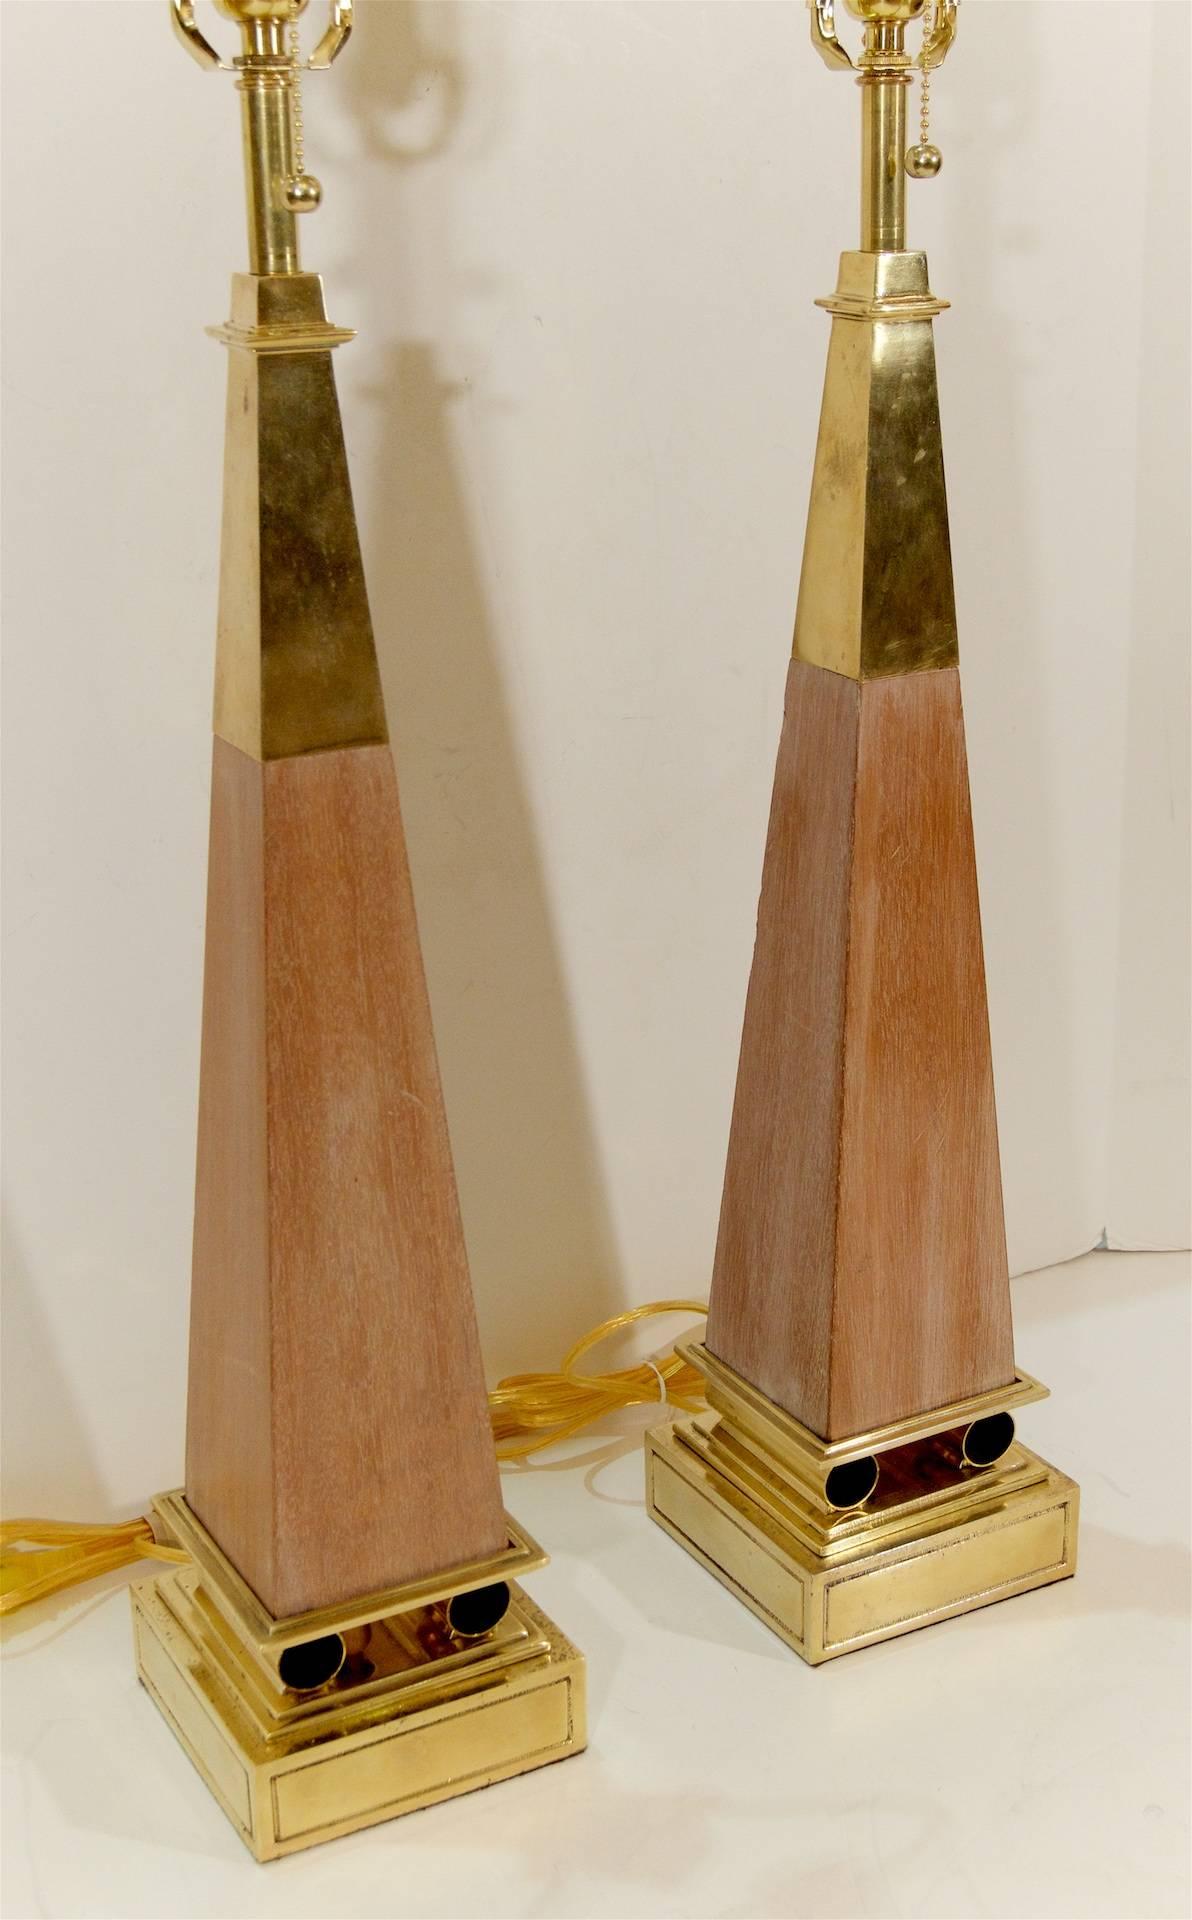 American Pair of Obelisk Form Table Lamps Attributed to Parzinger